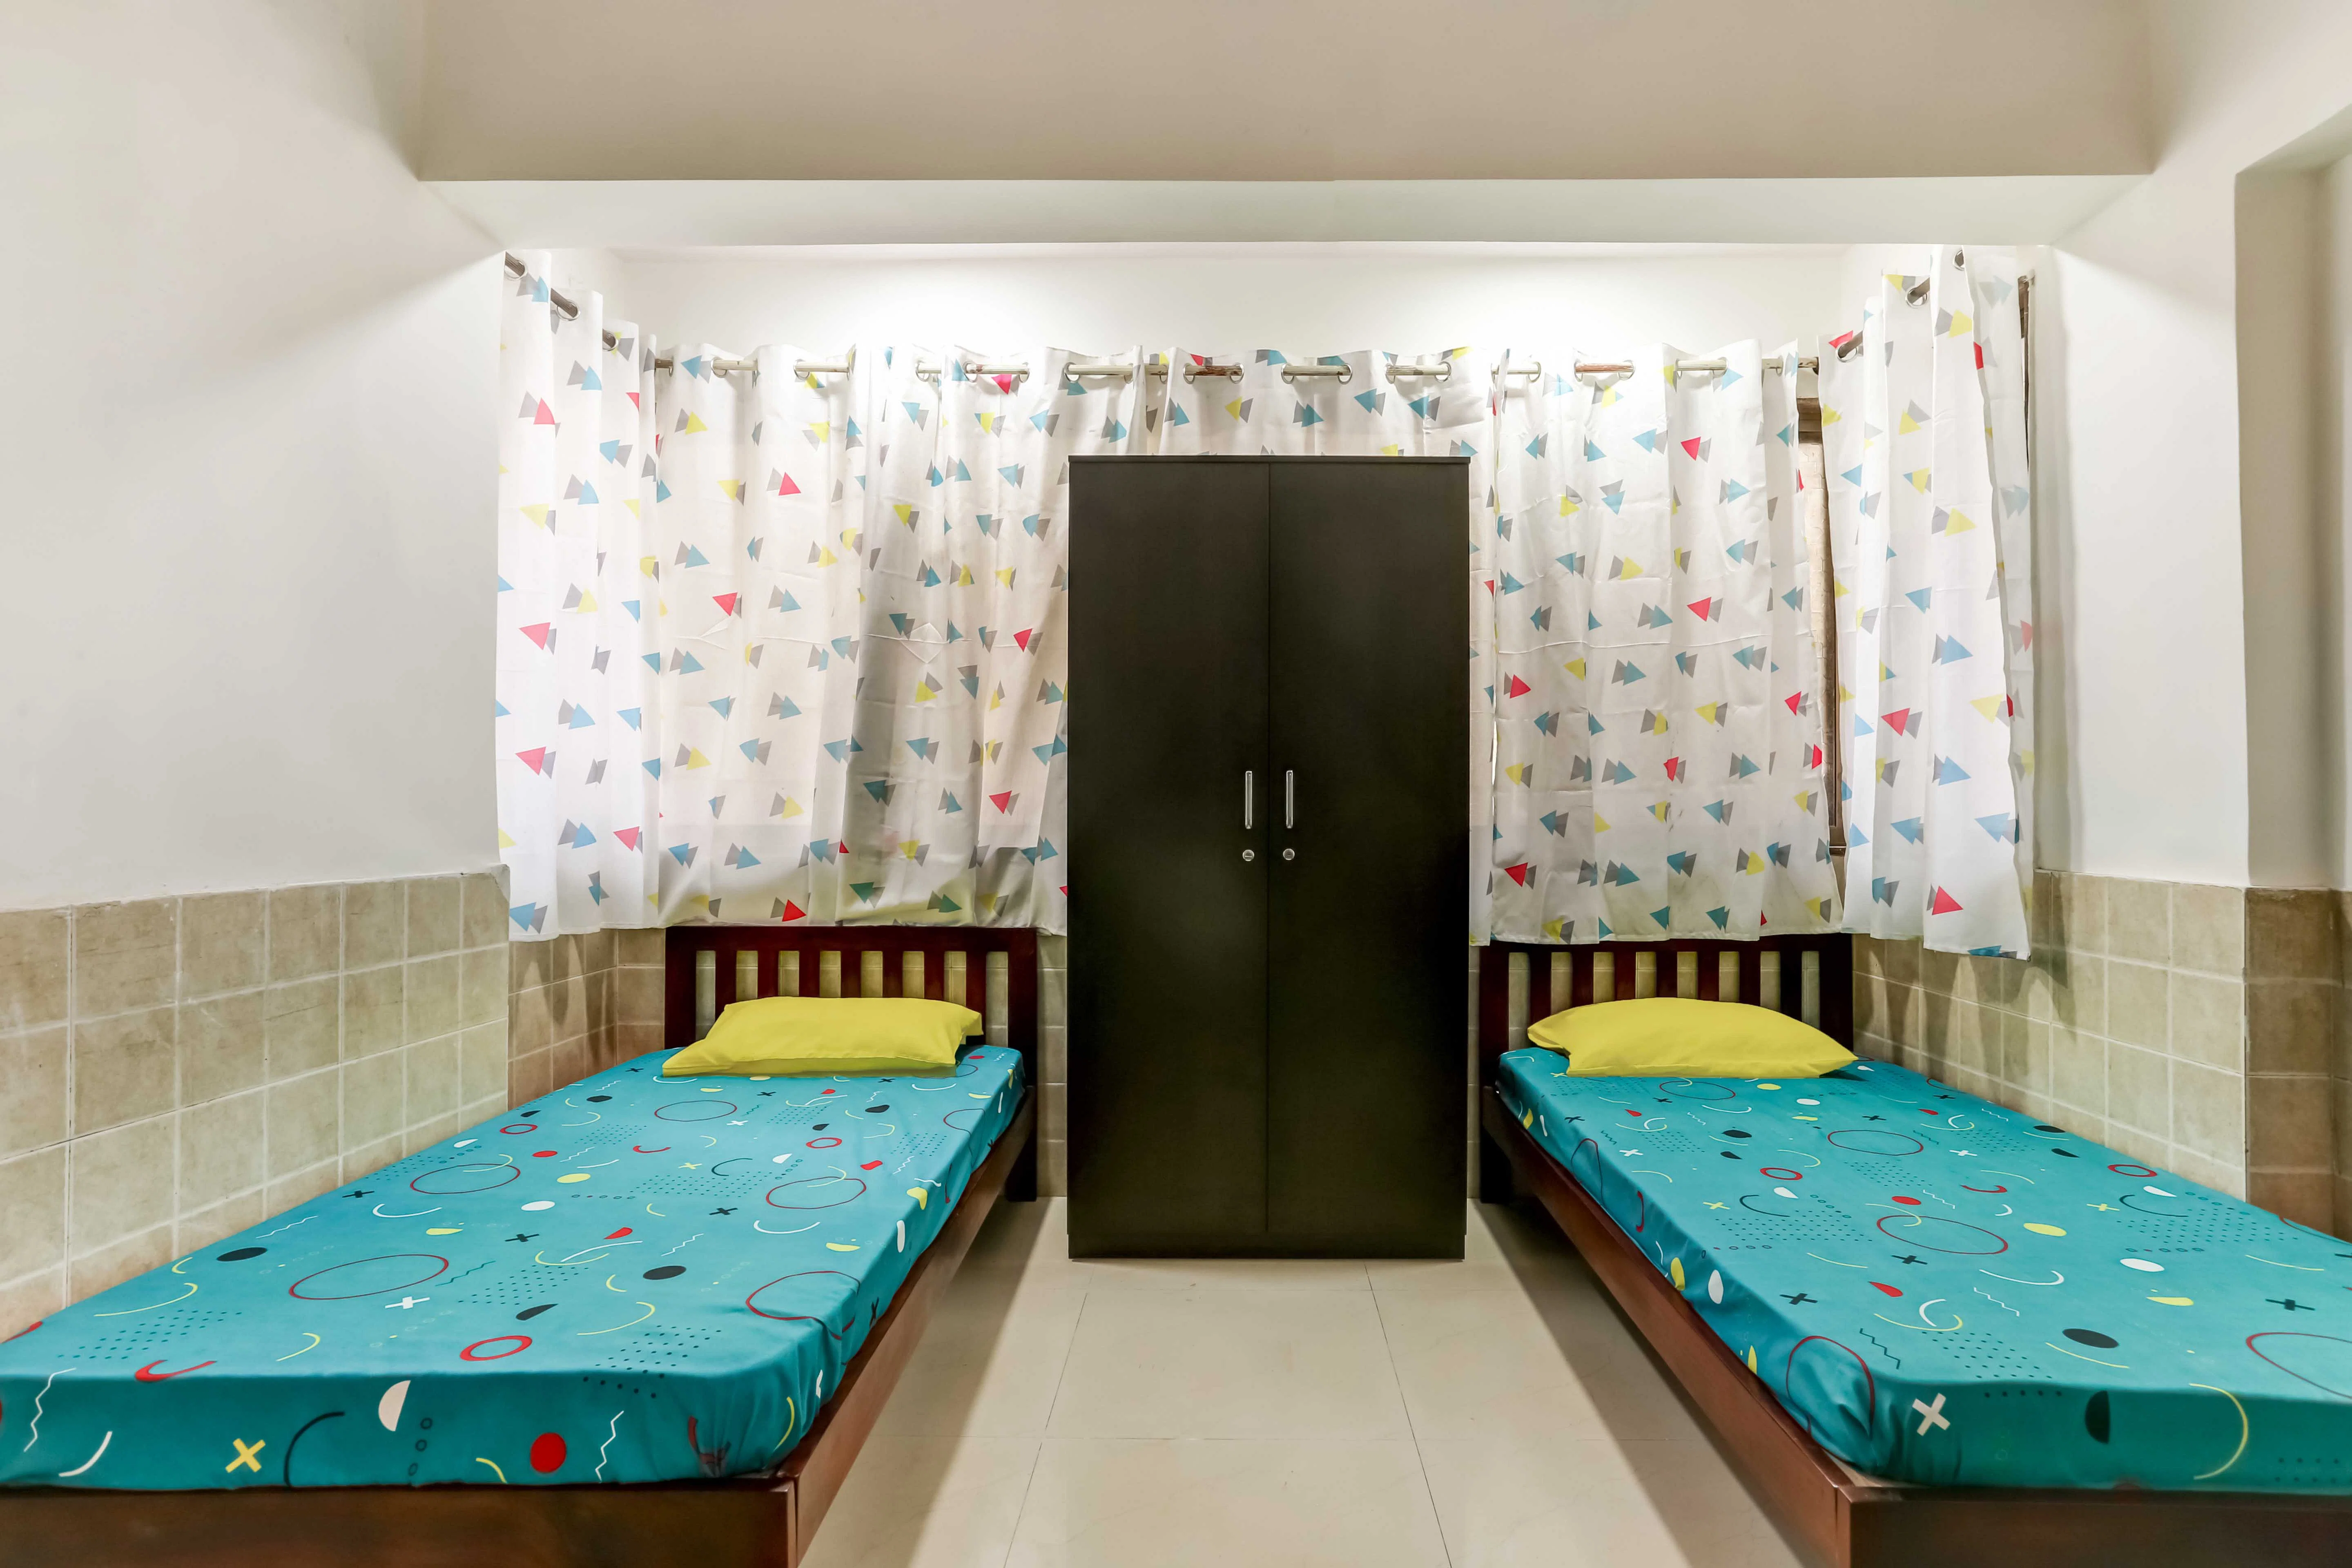 safe and affordable hostels for gents students with 24/7 security and CCTV surveillance-Zolo Subway